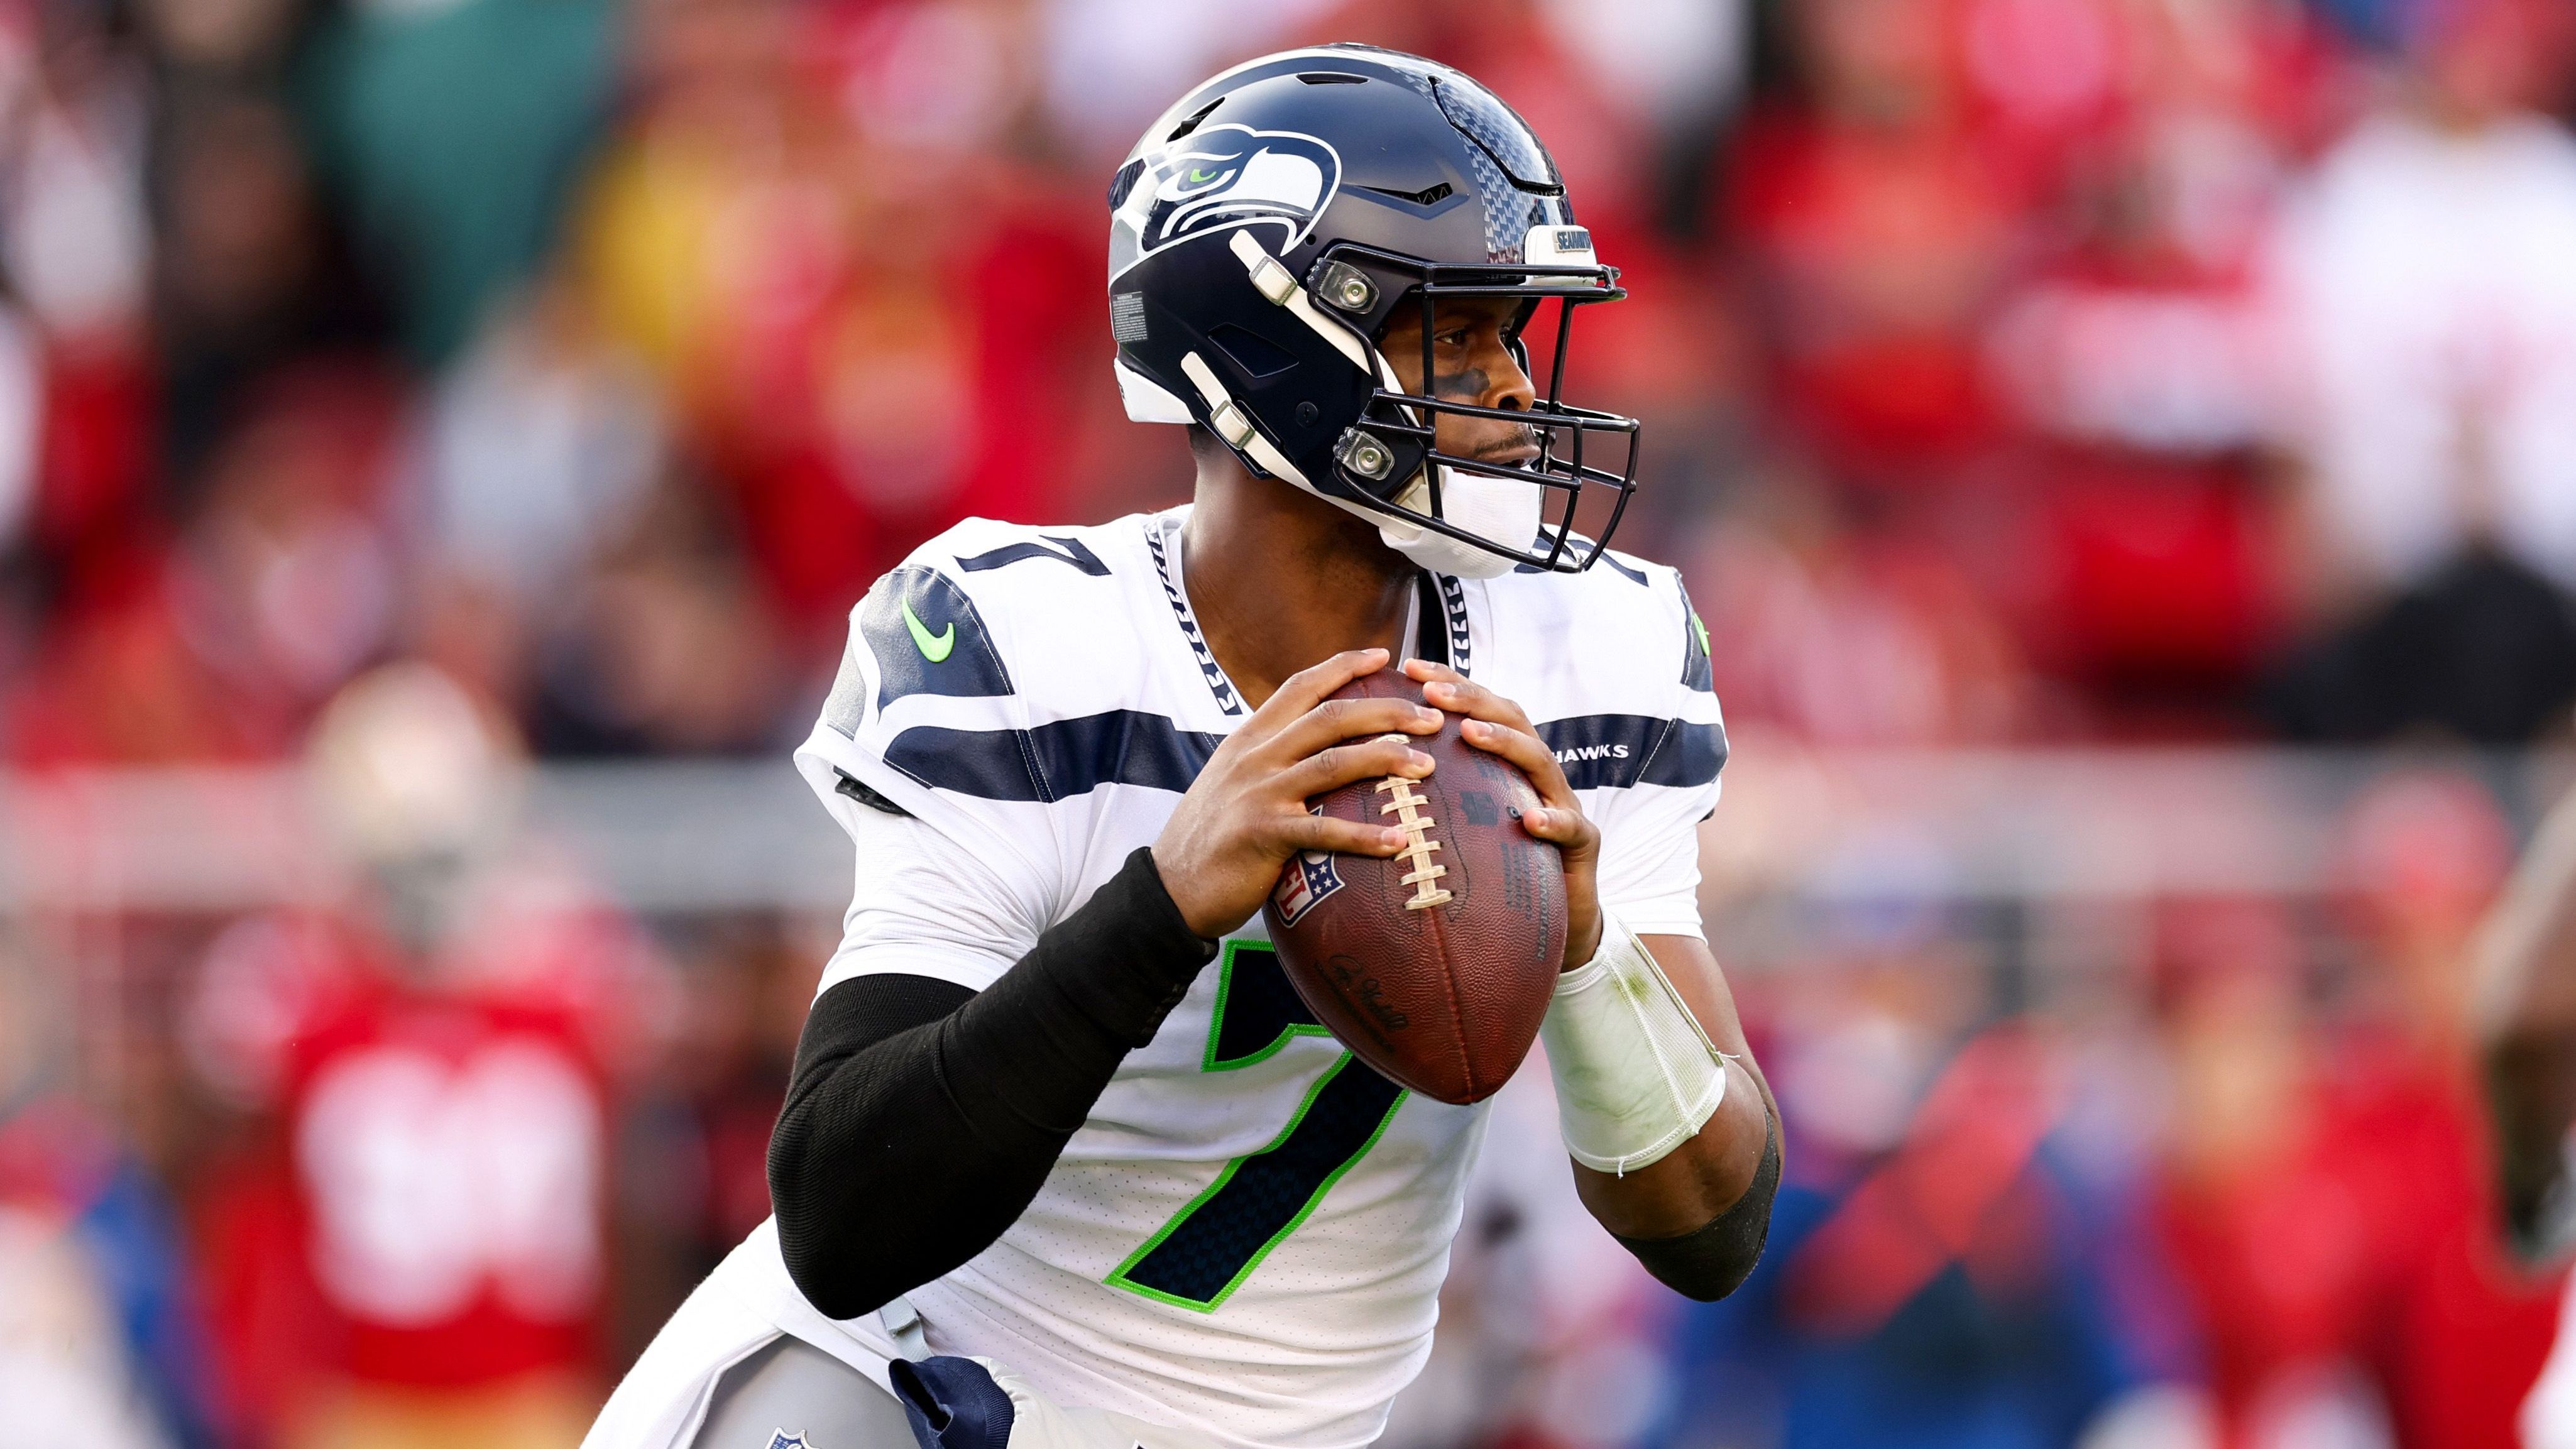 <strong>Platz 77: Geno Smith</strong><br>- Quarterback<br>- Seattle Seahawks